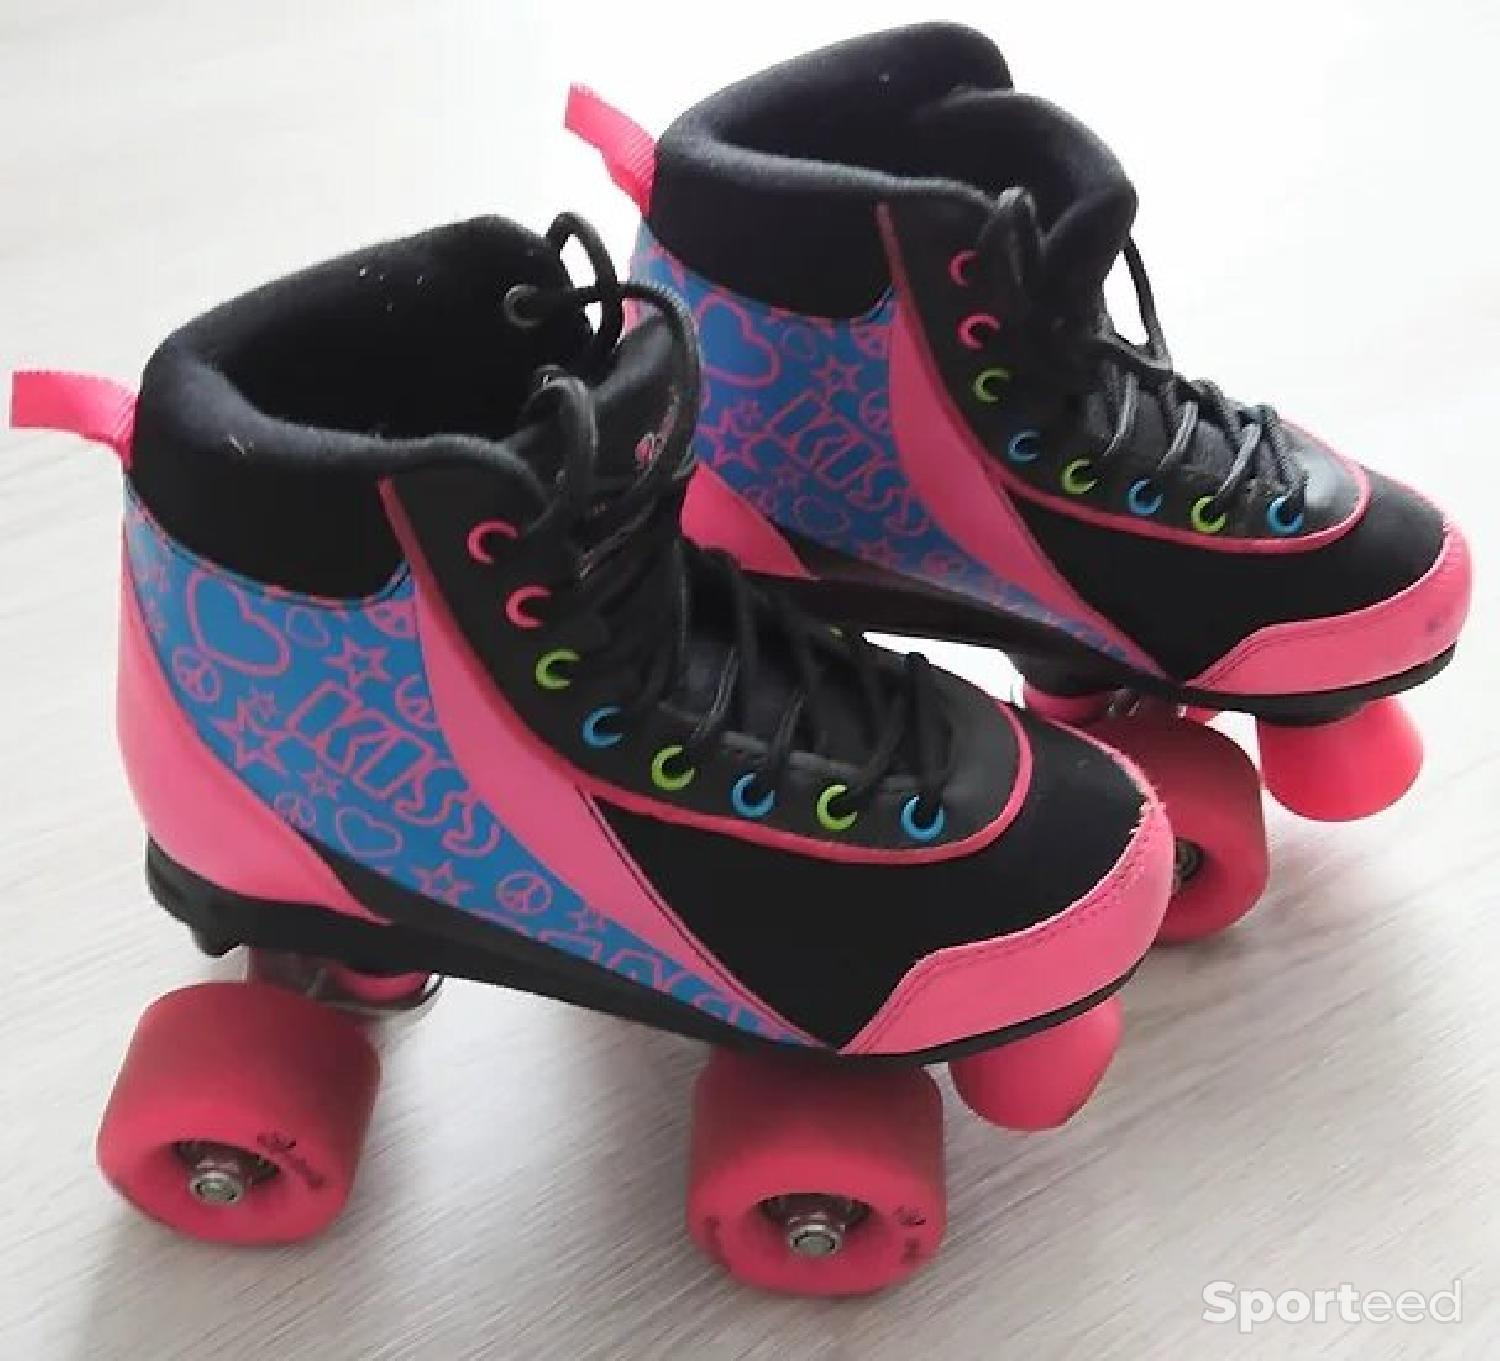 Rollers 4 roues d'occasion : Mixte